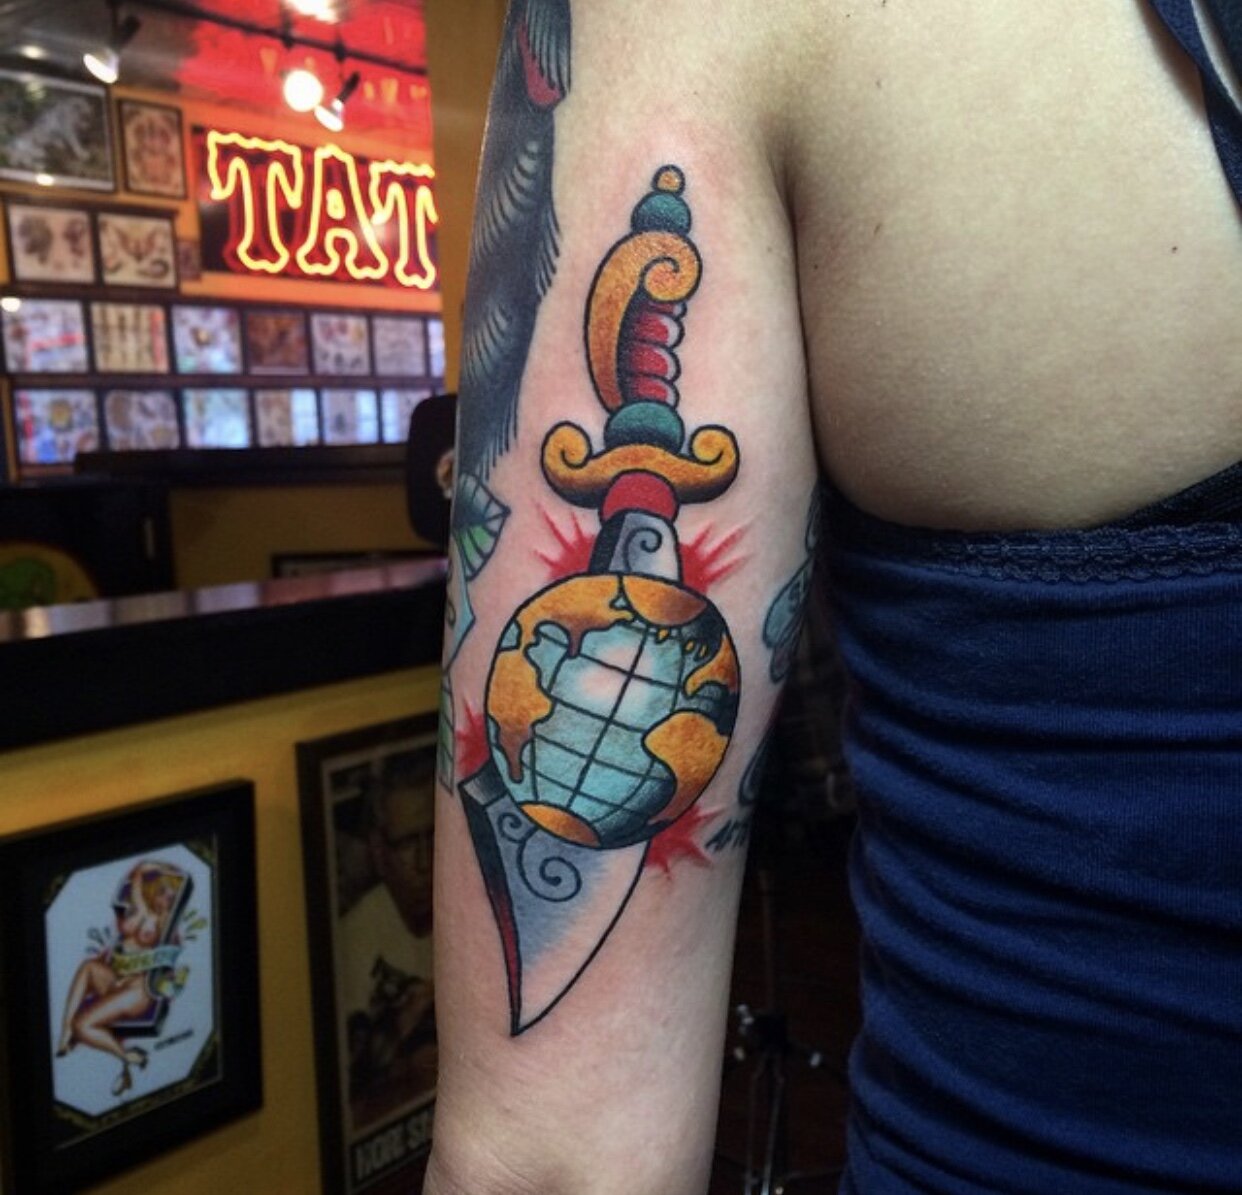 Sword and globe tattoo in bold color by Andrew Patch at Southern Star Tattoo in Atlanta, Georgia.